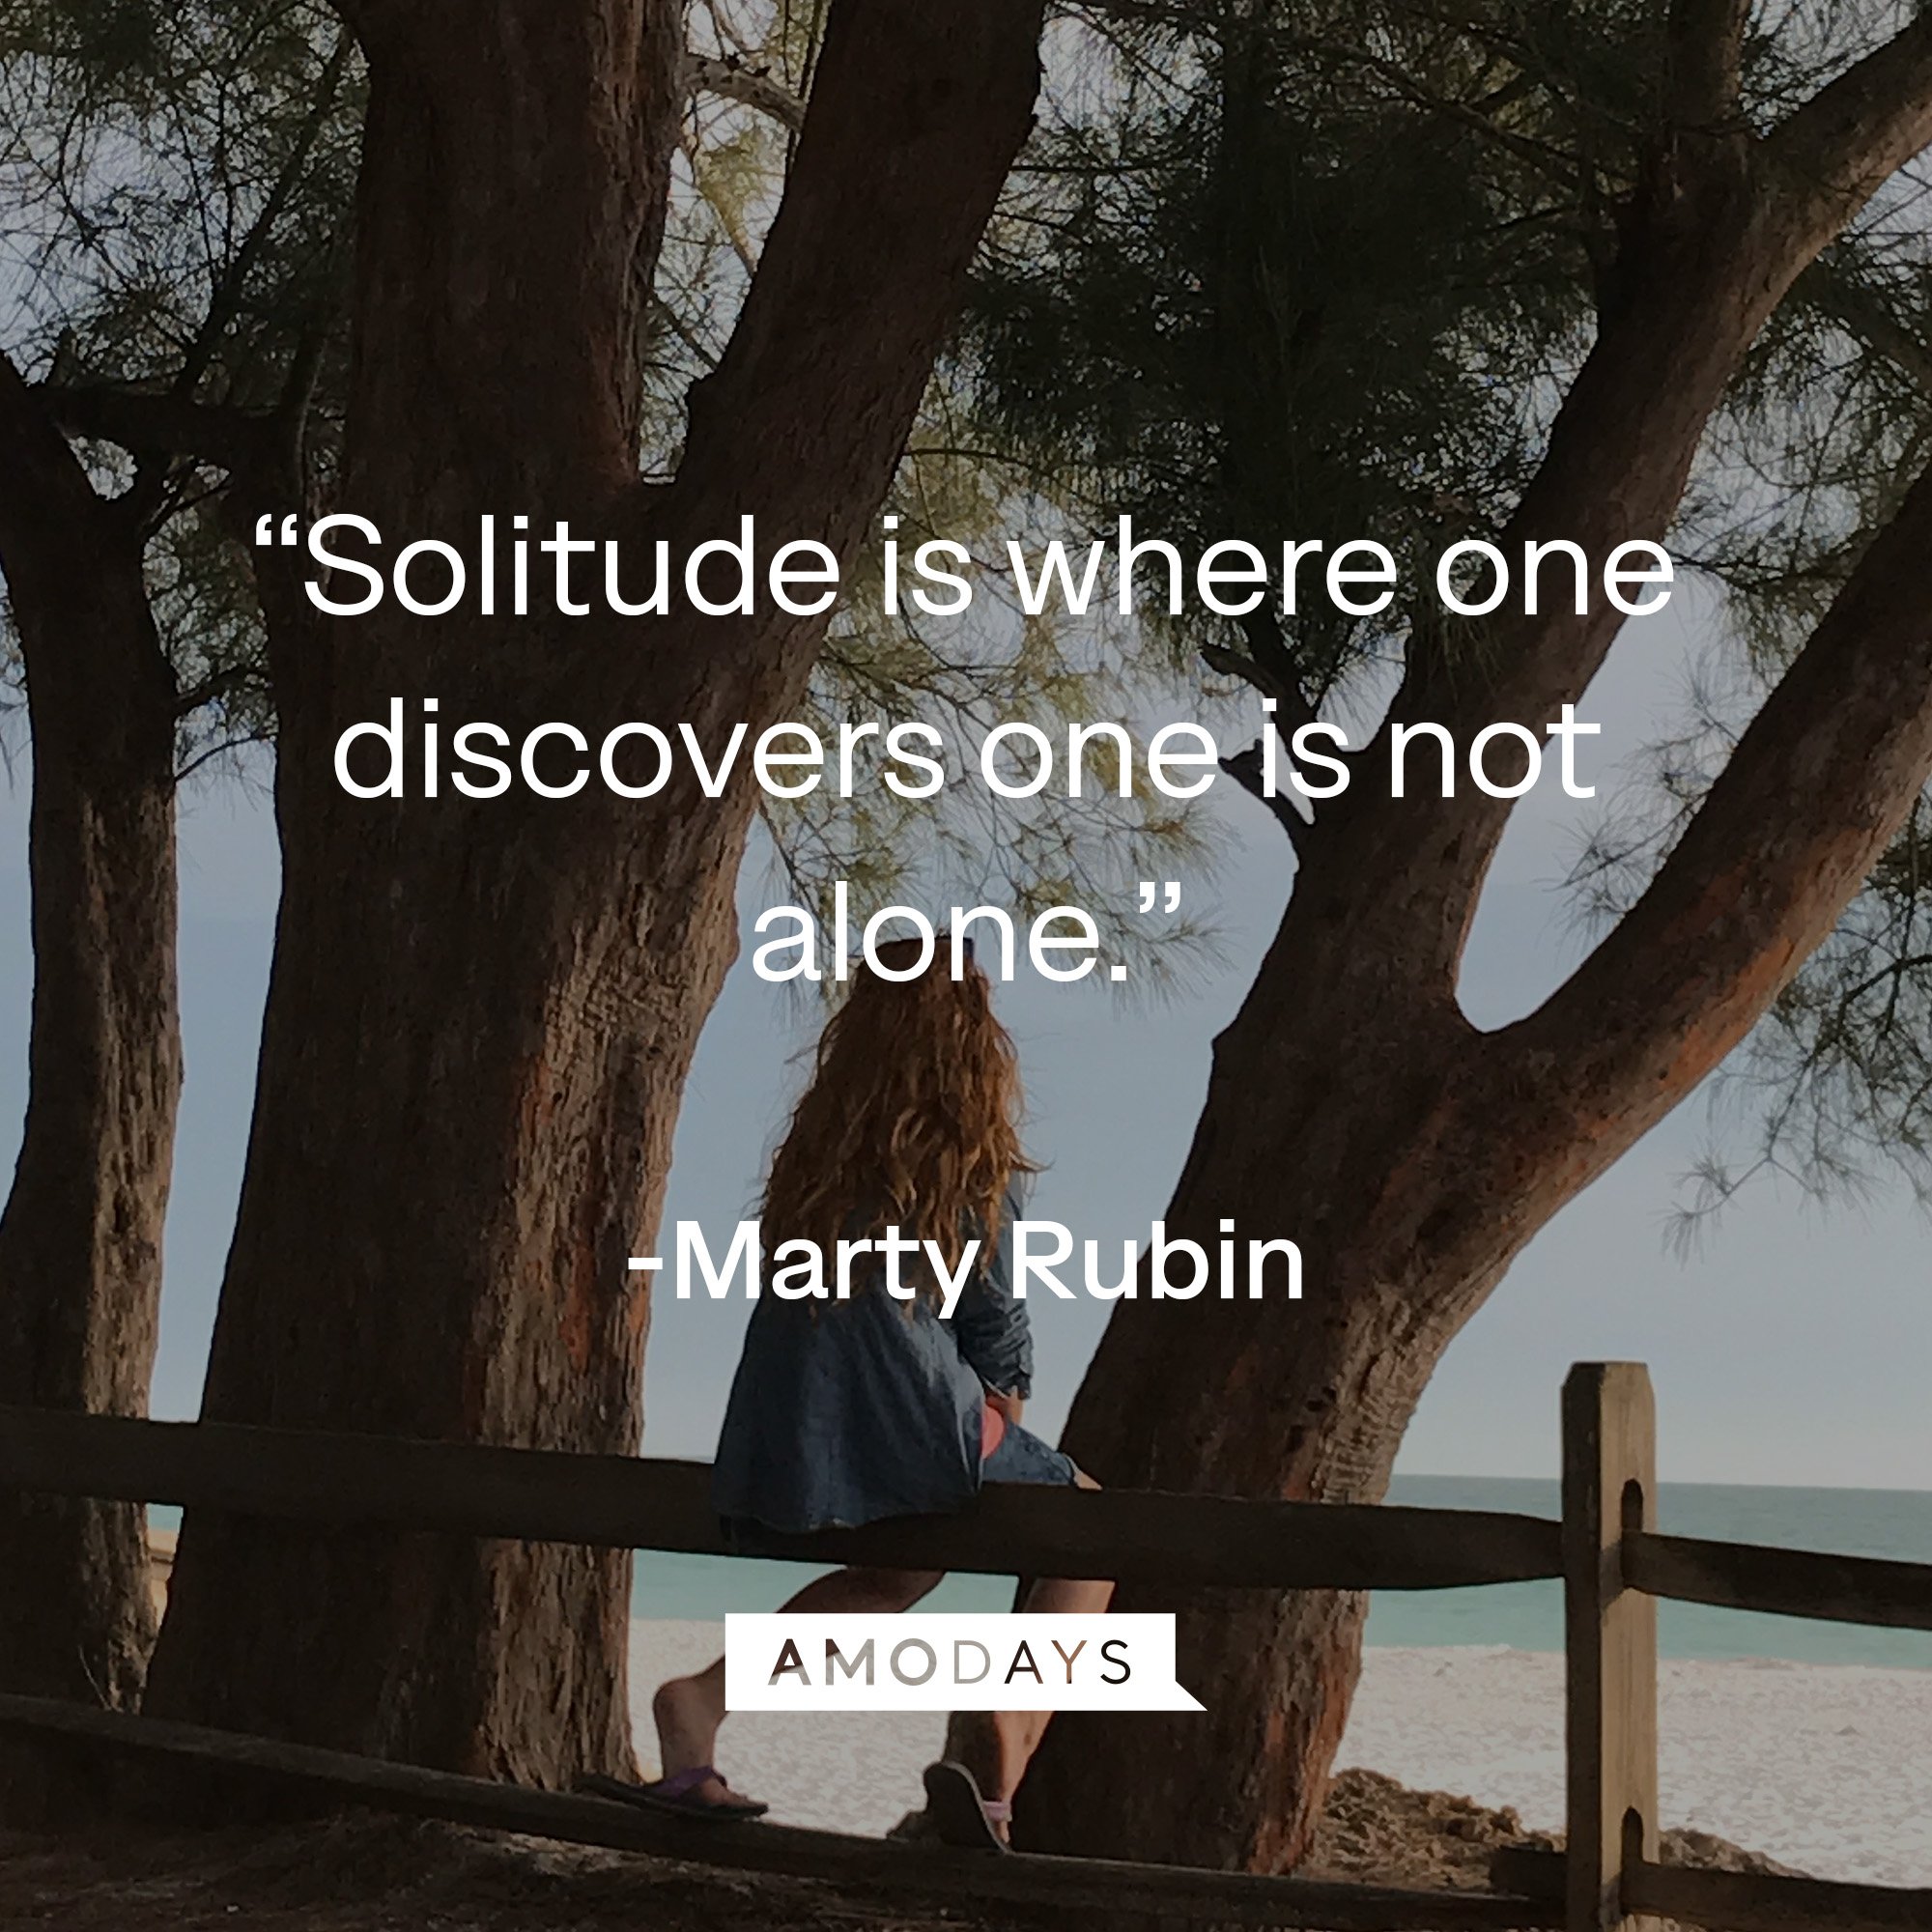 Marty Rubin’s quote: “Solitude is where one discovers one is not alone.”  | Image:  Amodays